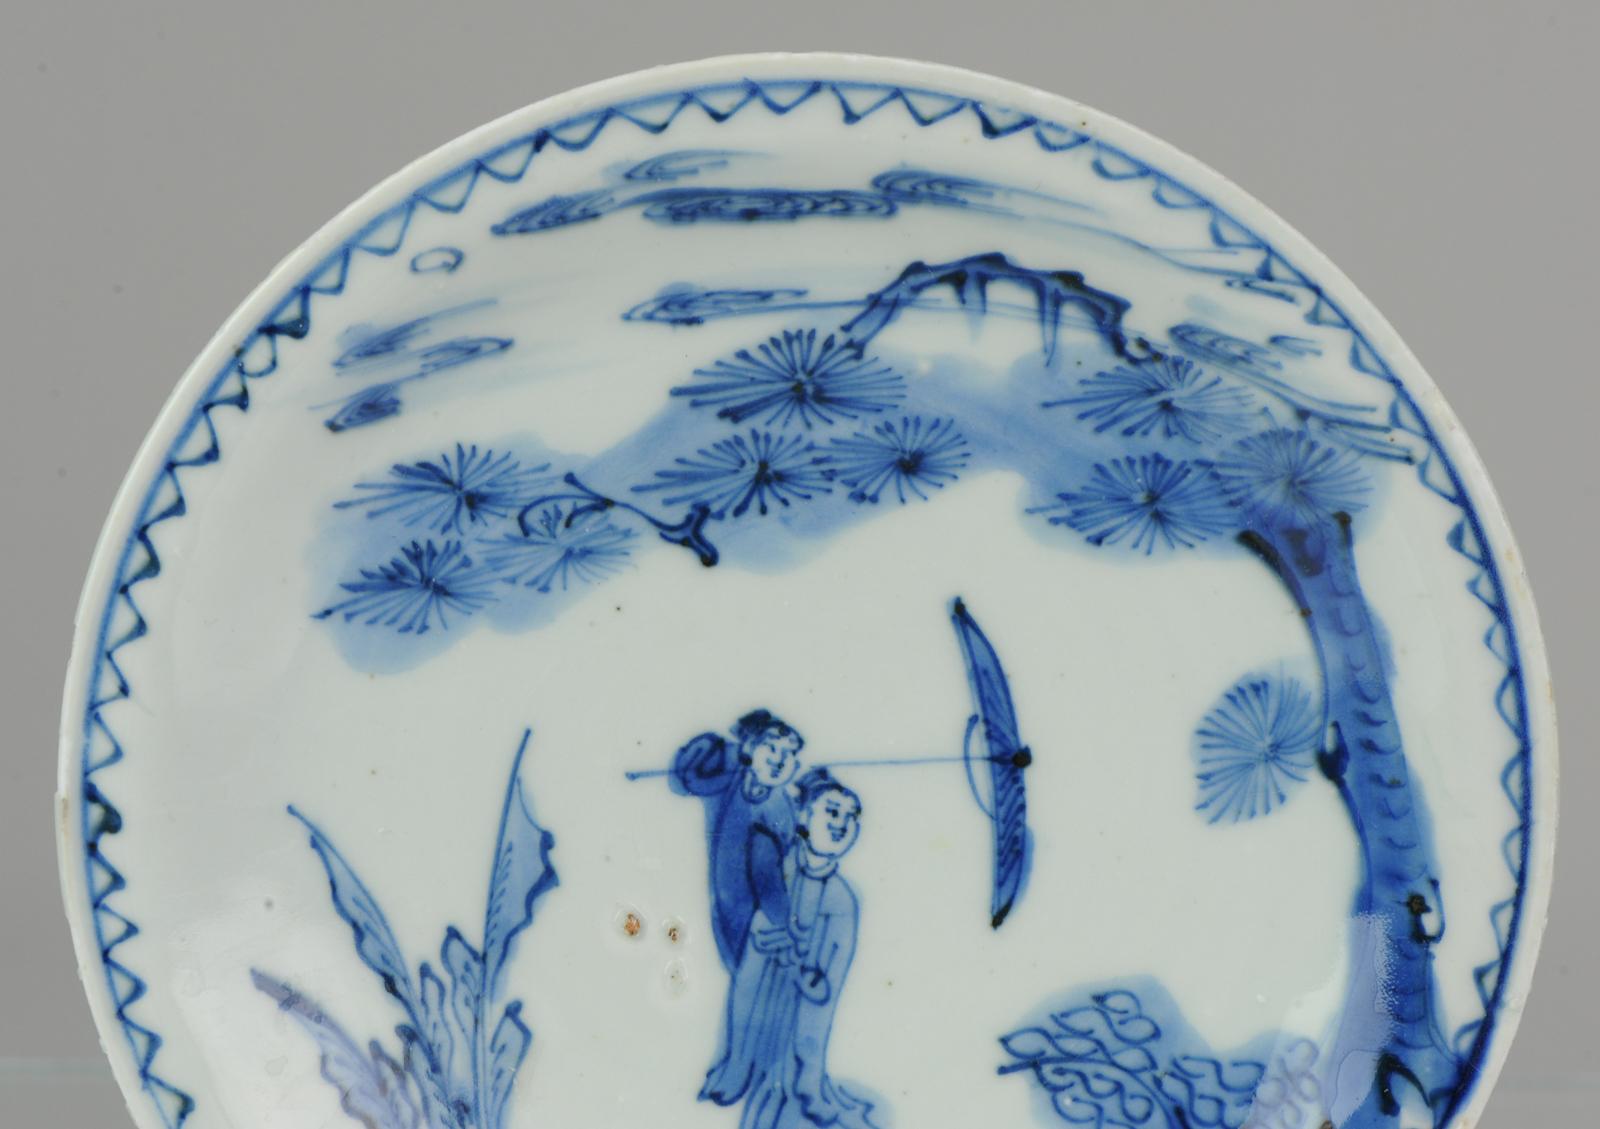 A very nicely decorated kosometsuke plate with a rare scene suggesting an secret romantic meeting, a lady and umbrella-bearing gentleman closely together beneath a long overhanging pine tree beside bamboo and plantain, the scene moonlit and misty at